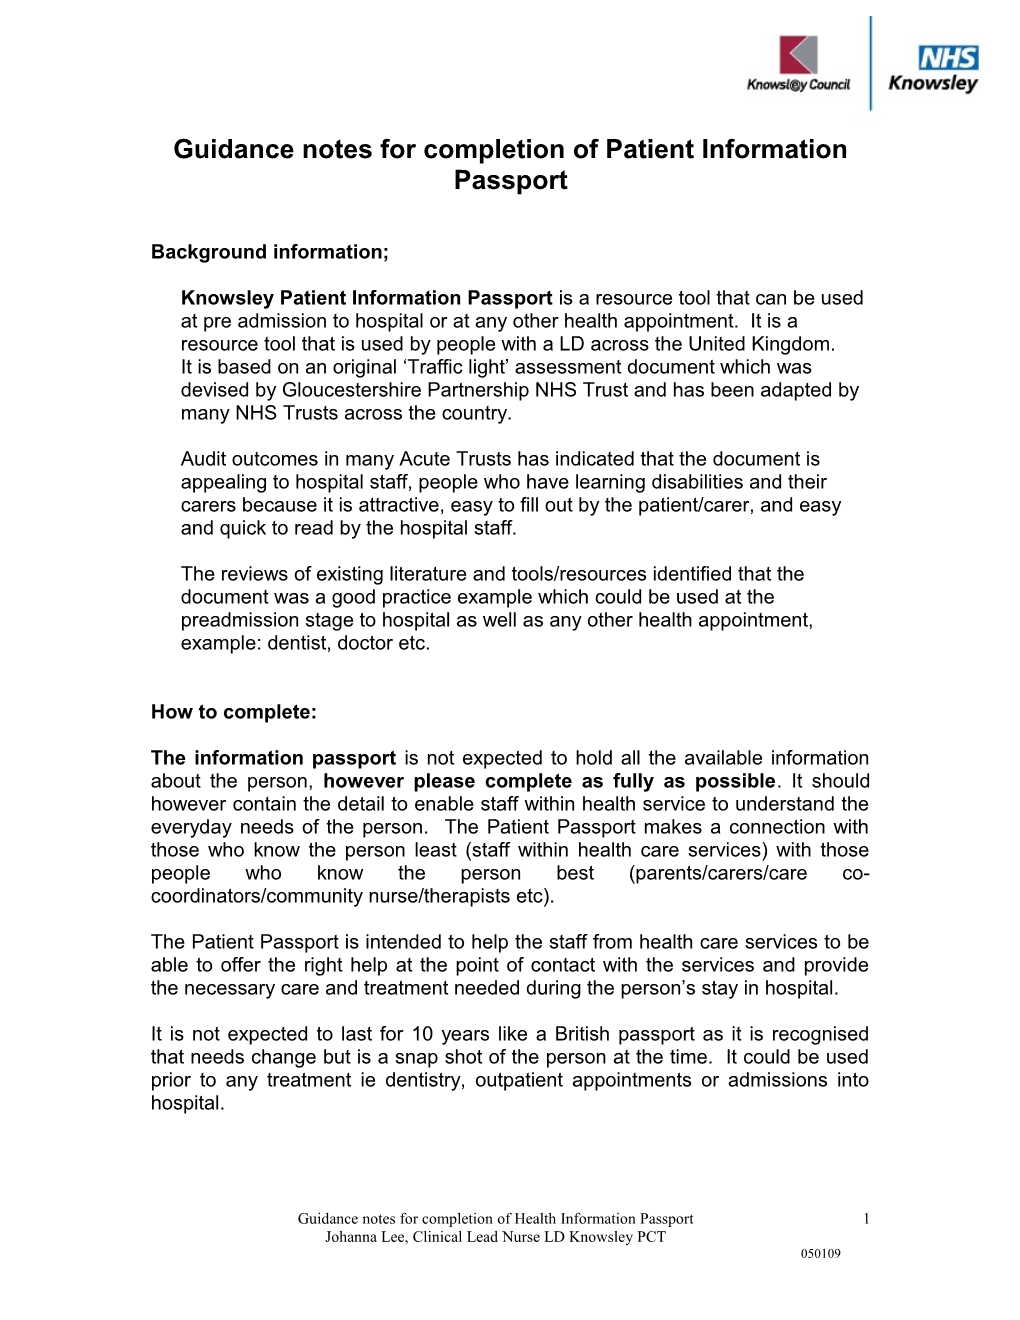 Guidance Notes for Completion of Patient Passport